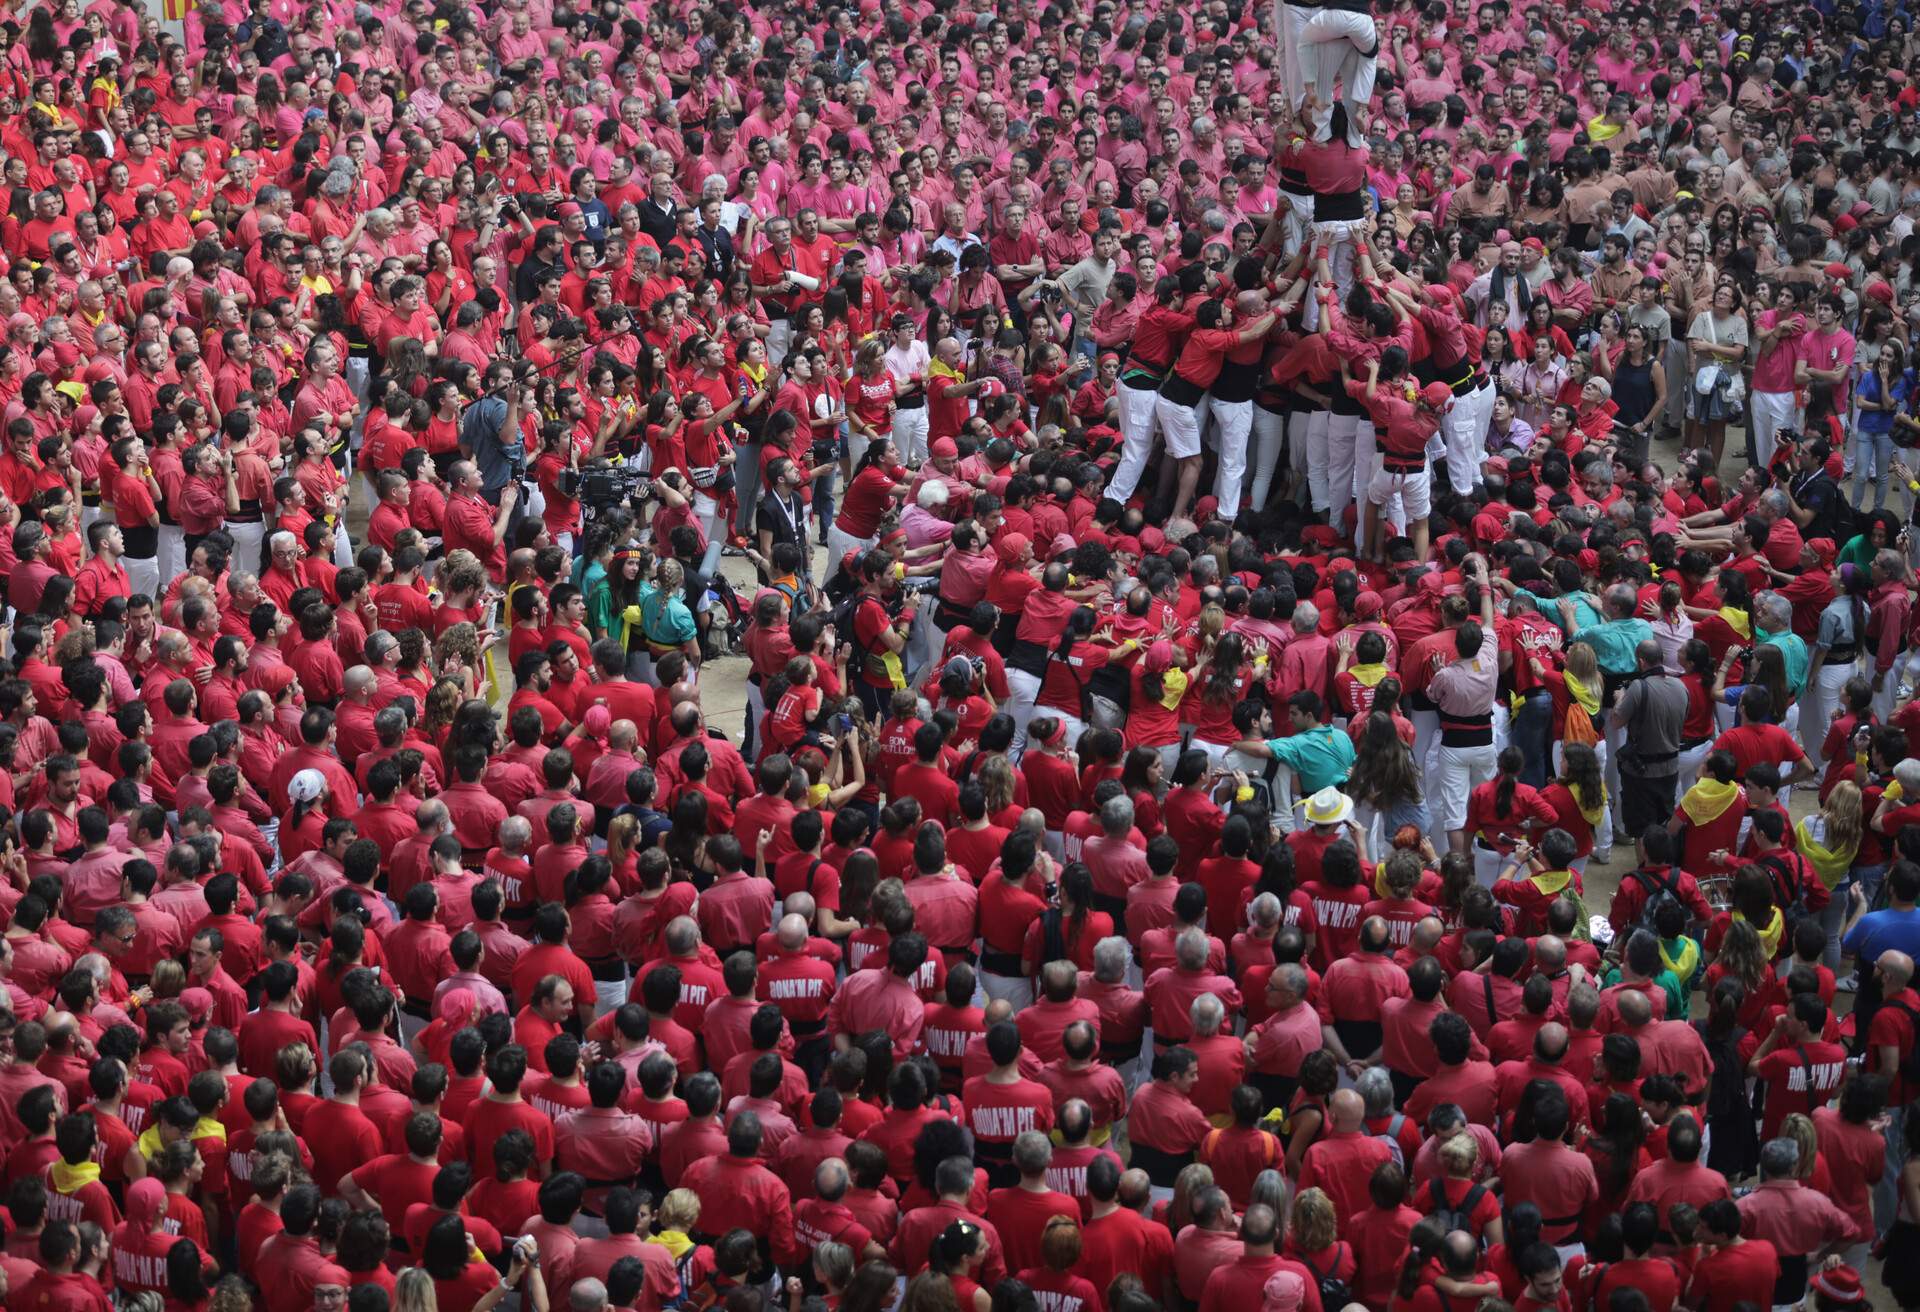 The Colla Vella Xiquets de Valls at the Human Towers biannual competition held in Tarragona, Catalonia.